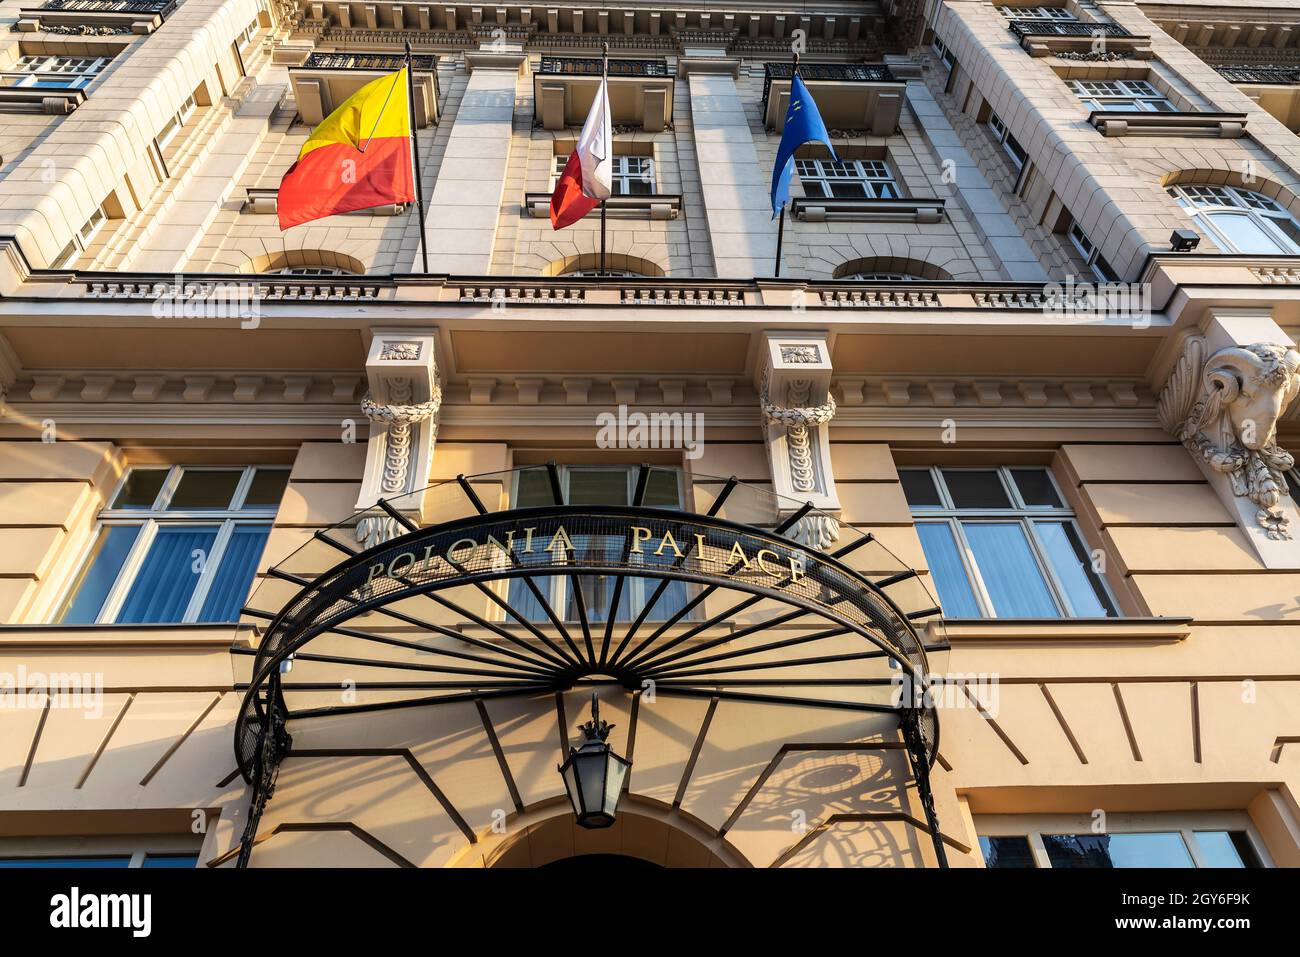 Warsaw, Poland - September 1, 2018: Facade of the Polonia Palace Hotel in the old town of Warsaw, Poland Stock Photo